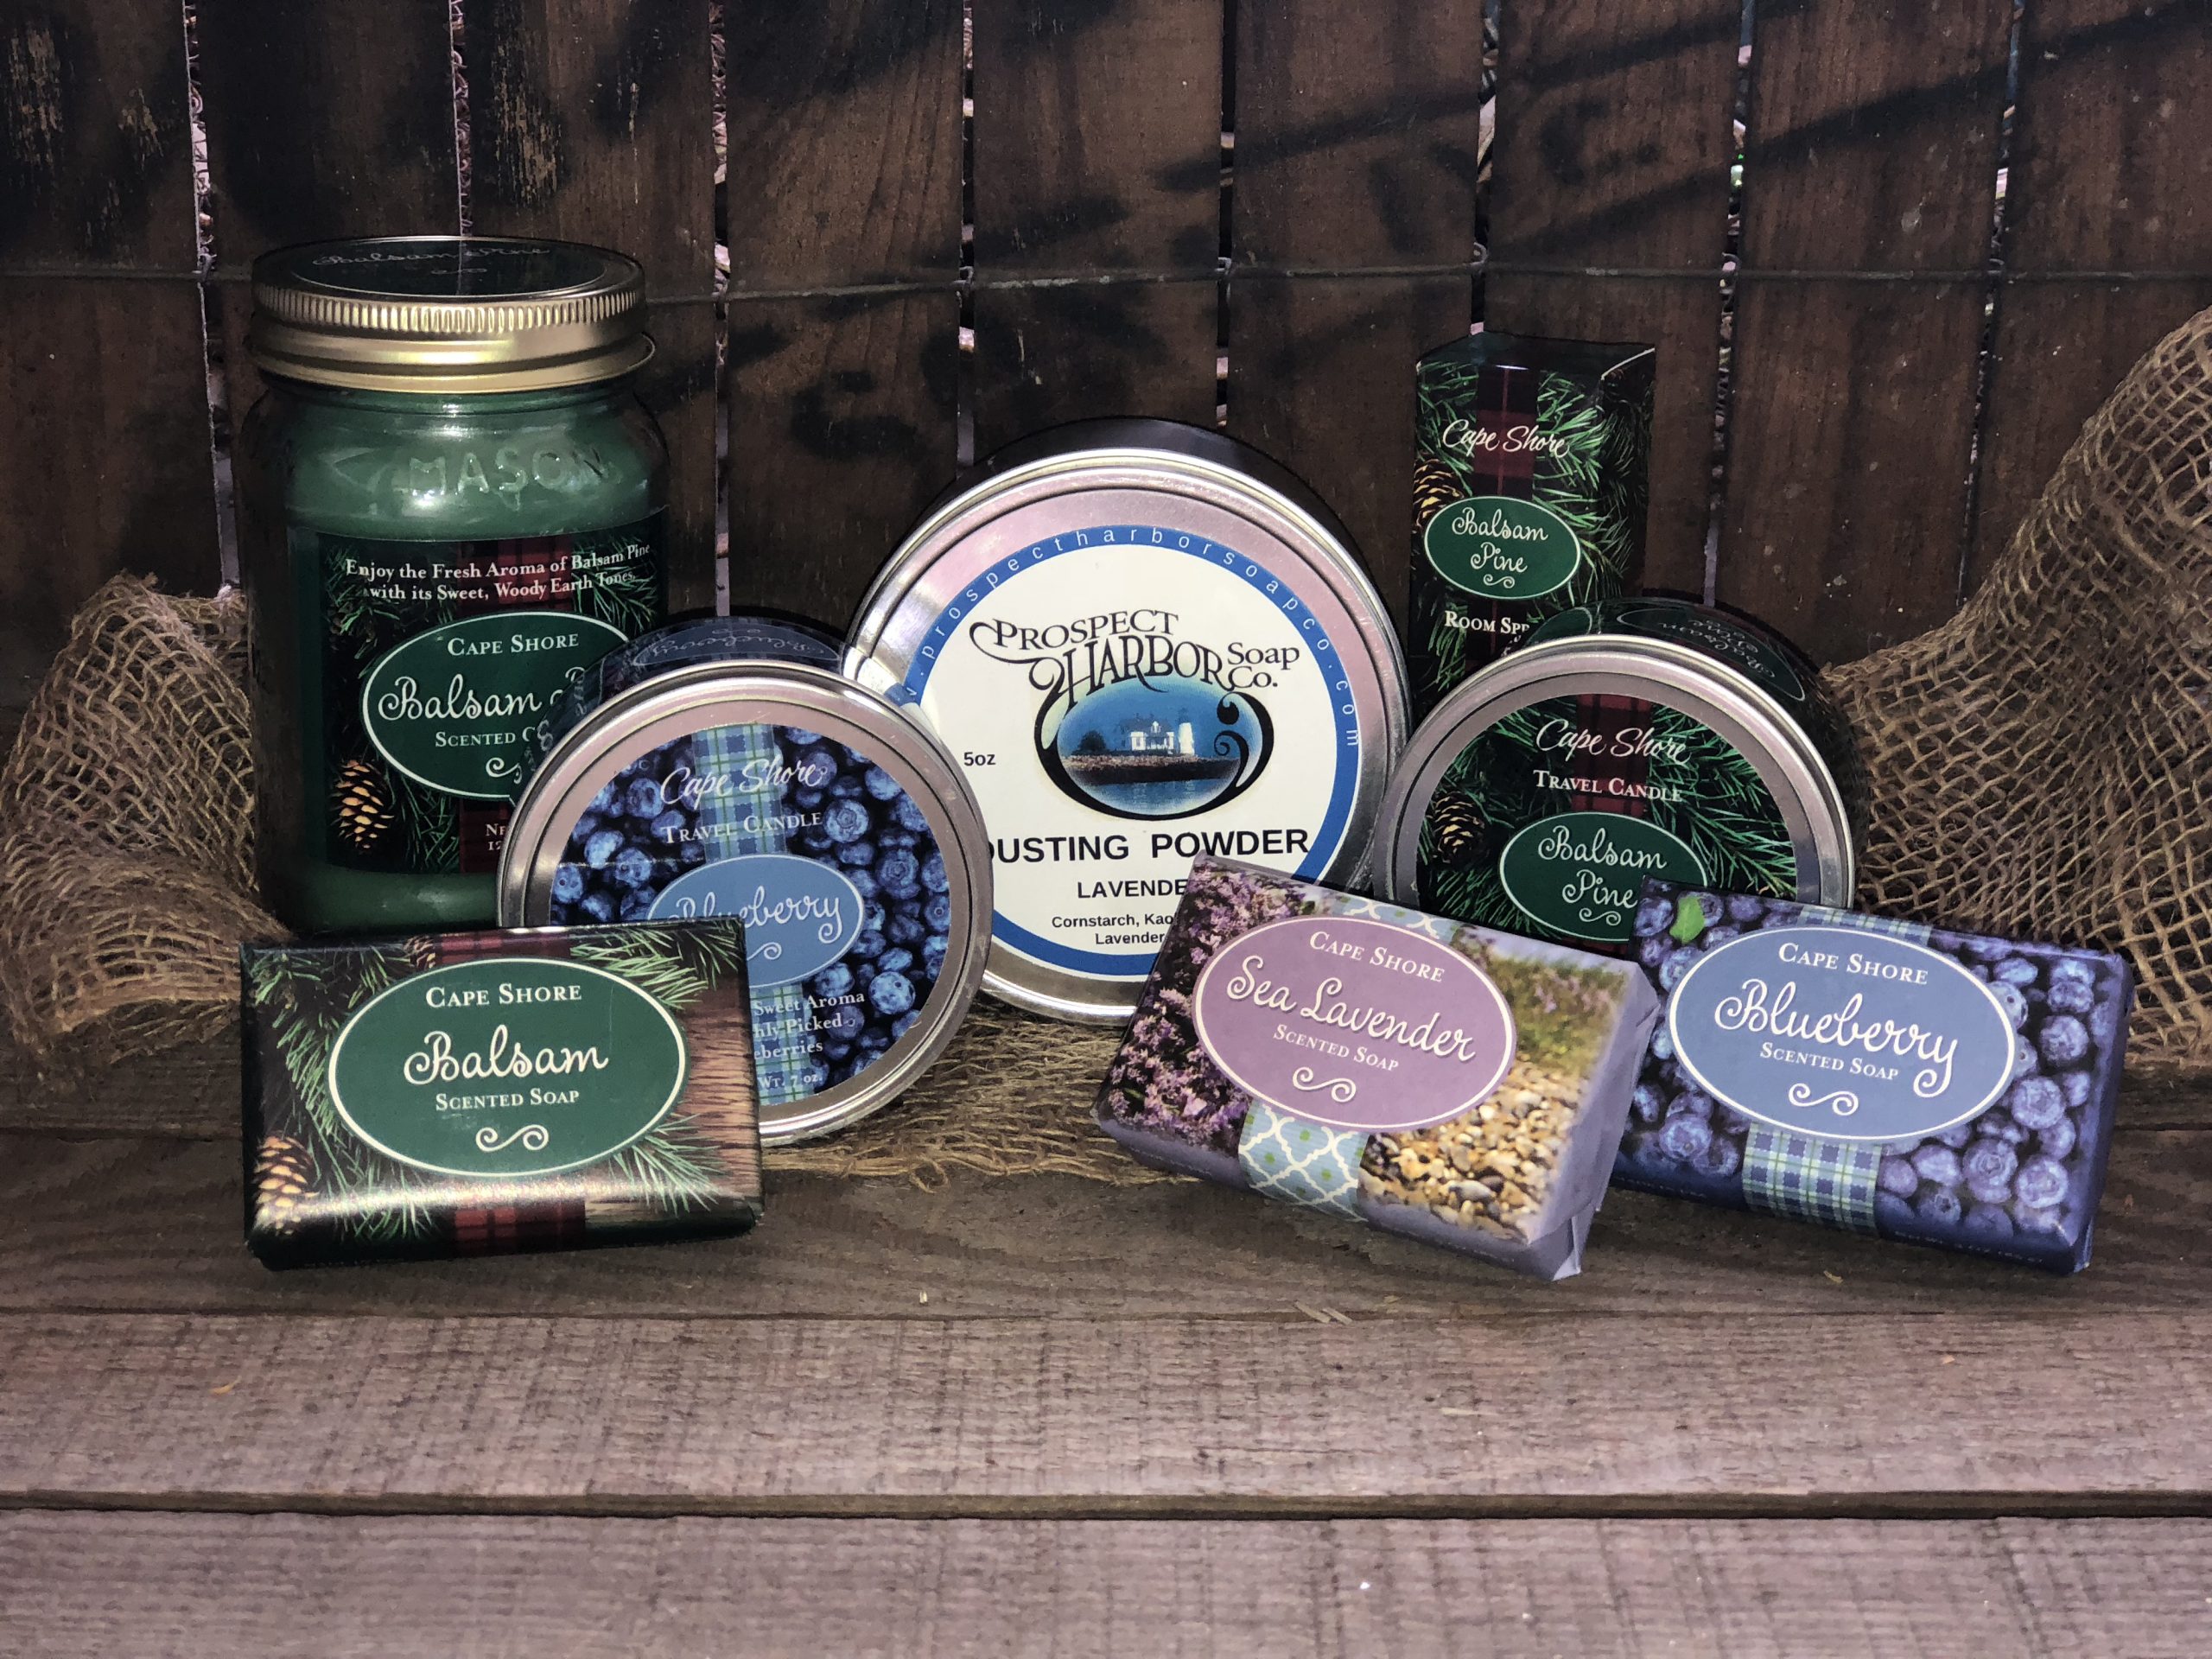 Balsam, Lavender, Blueberry….oh my!